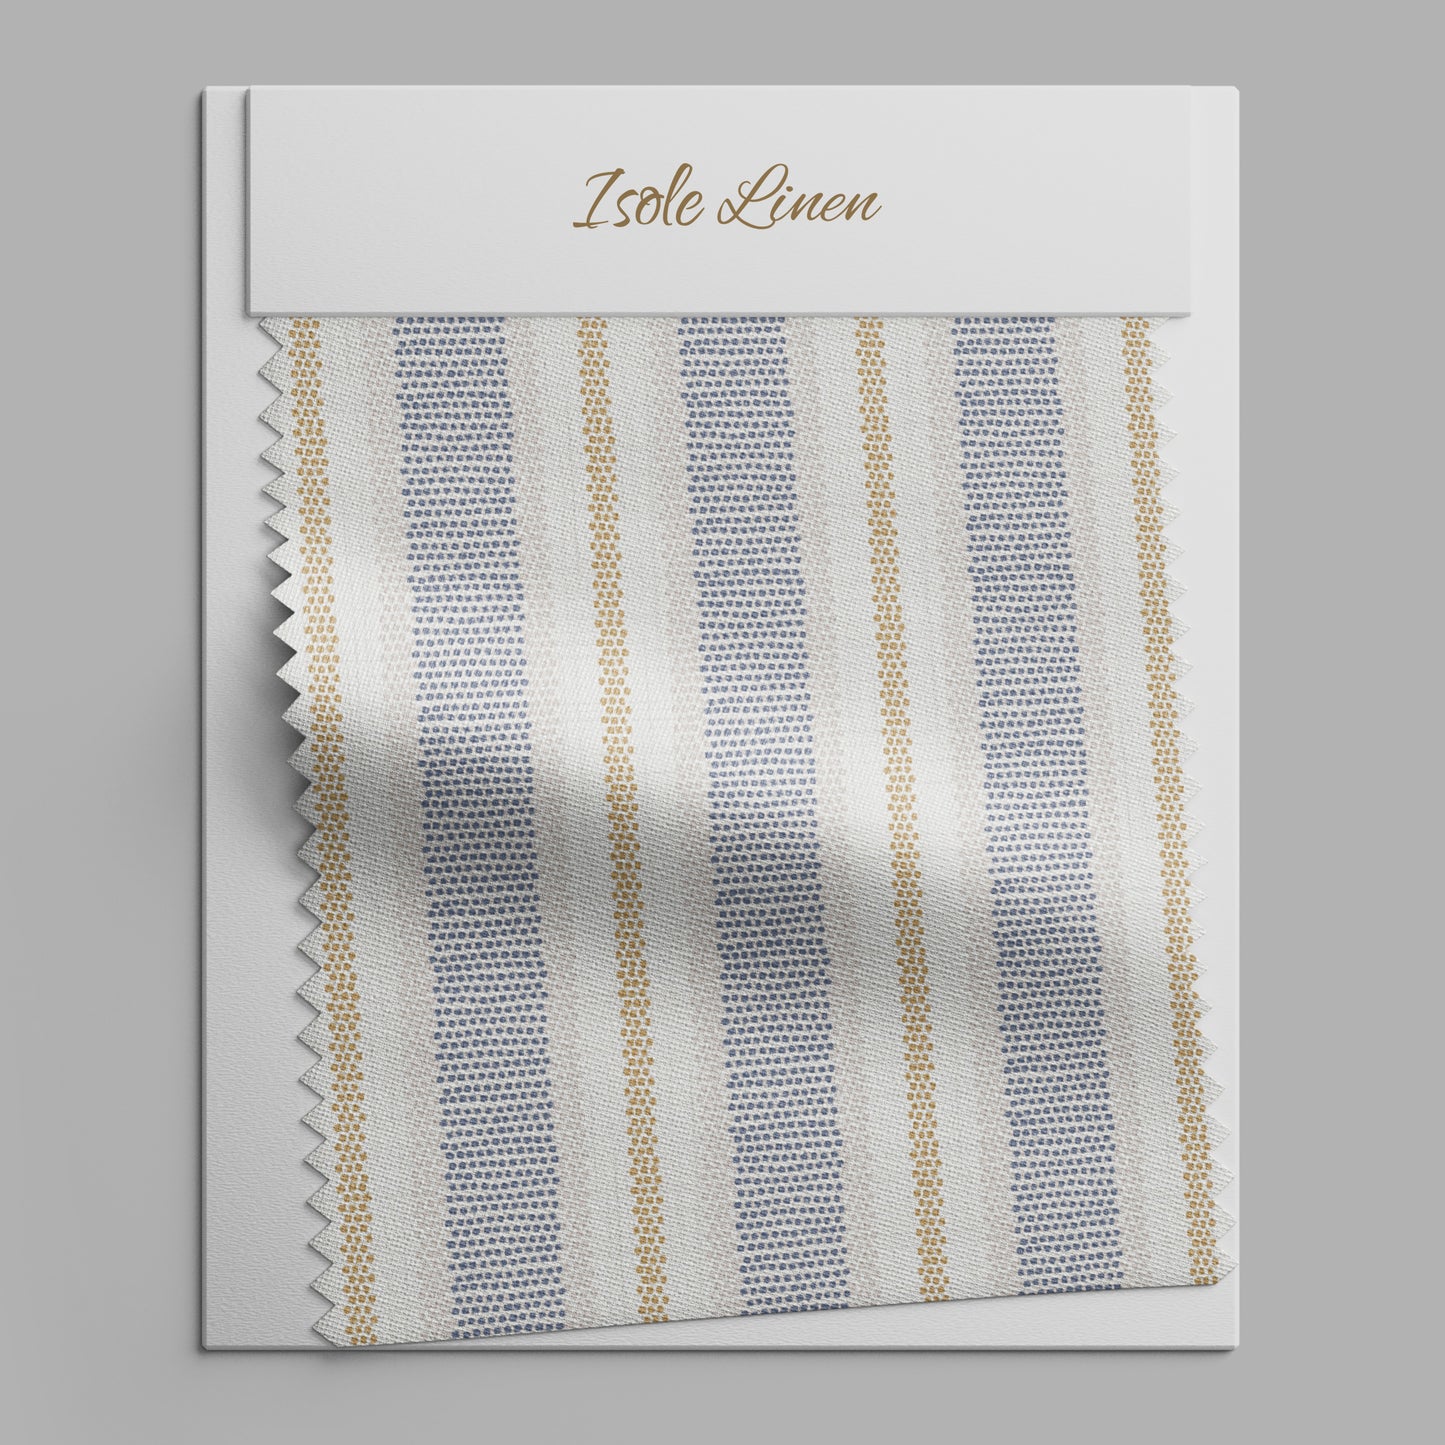 Provence Print Linen By The Yard or Meter, French Farmhouse Stripe Print Linen Fabric For Clothing, Bedding, Curtains & Upholstery